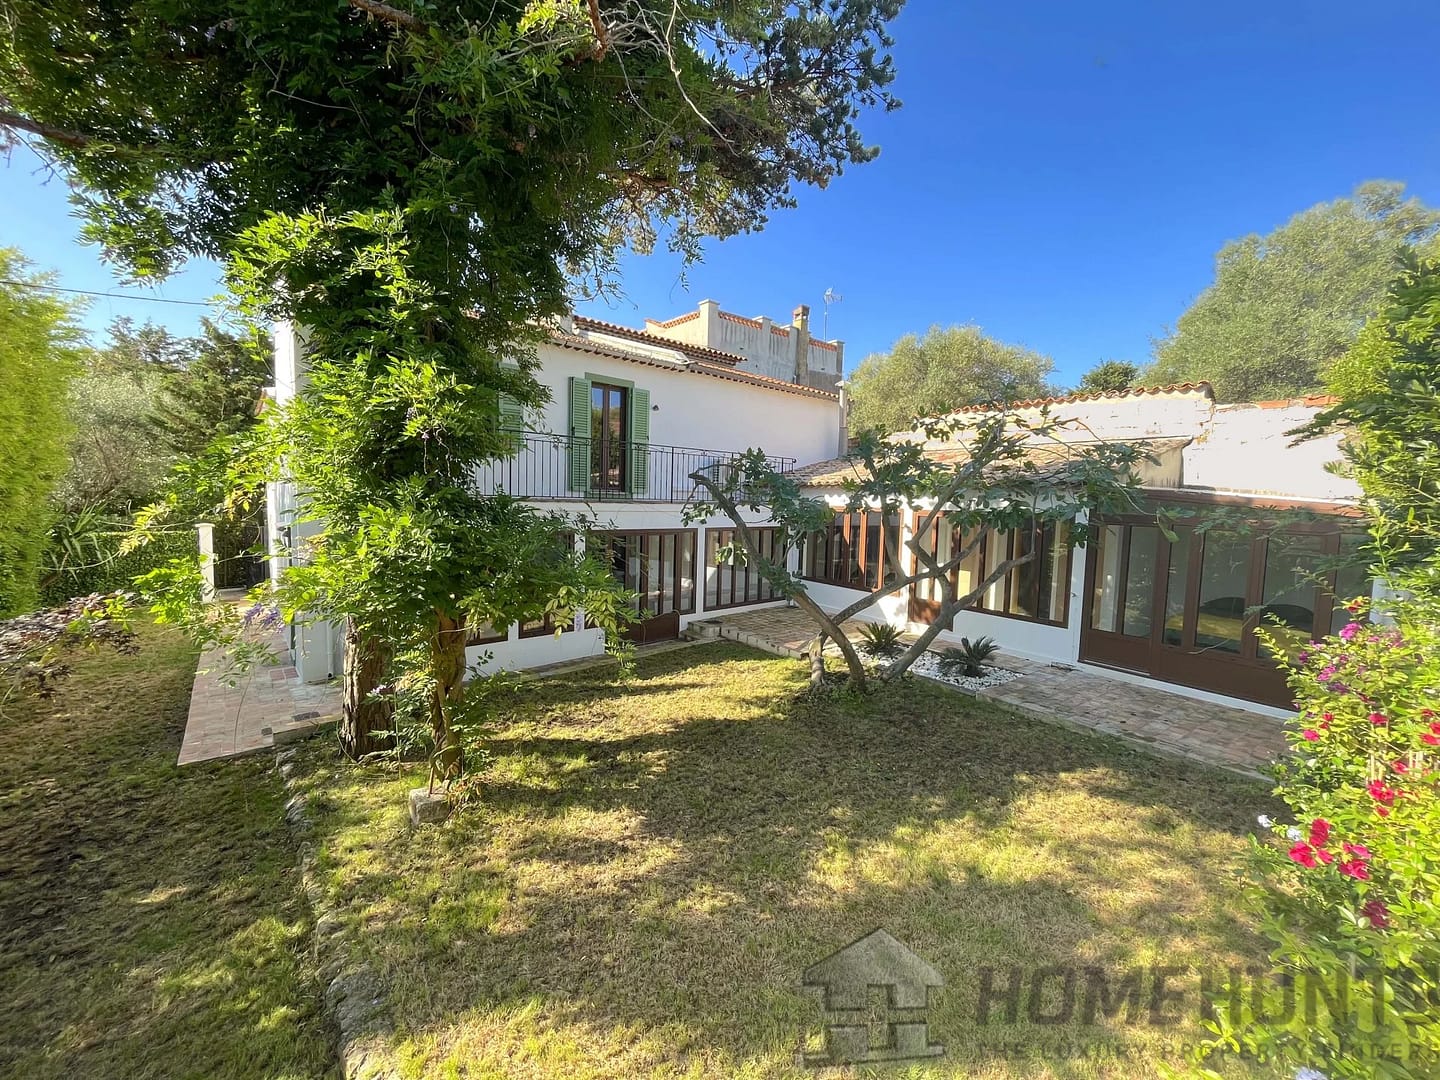 Villa/House For Sale in Antibes 10